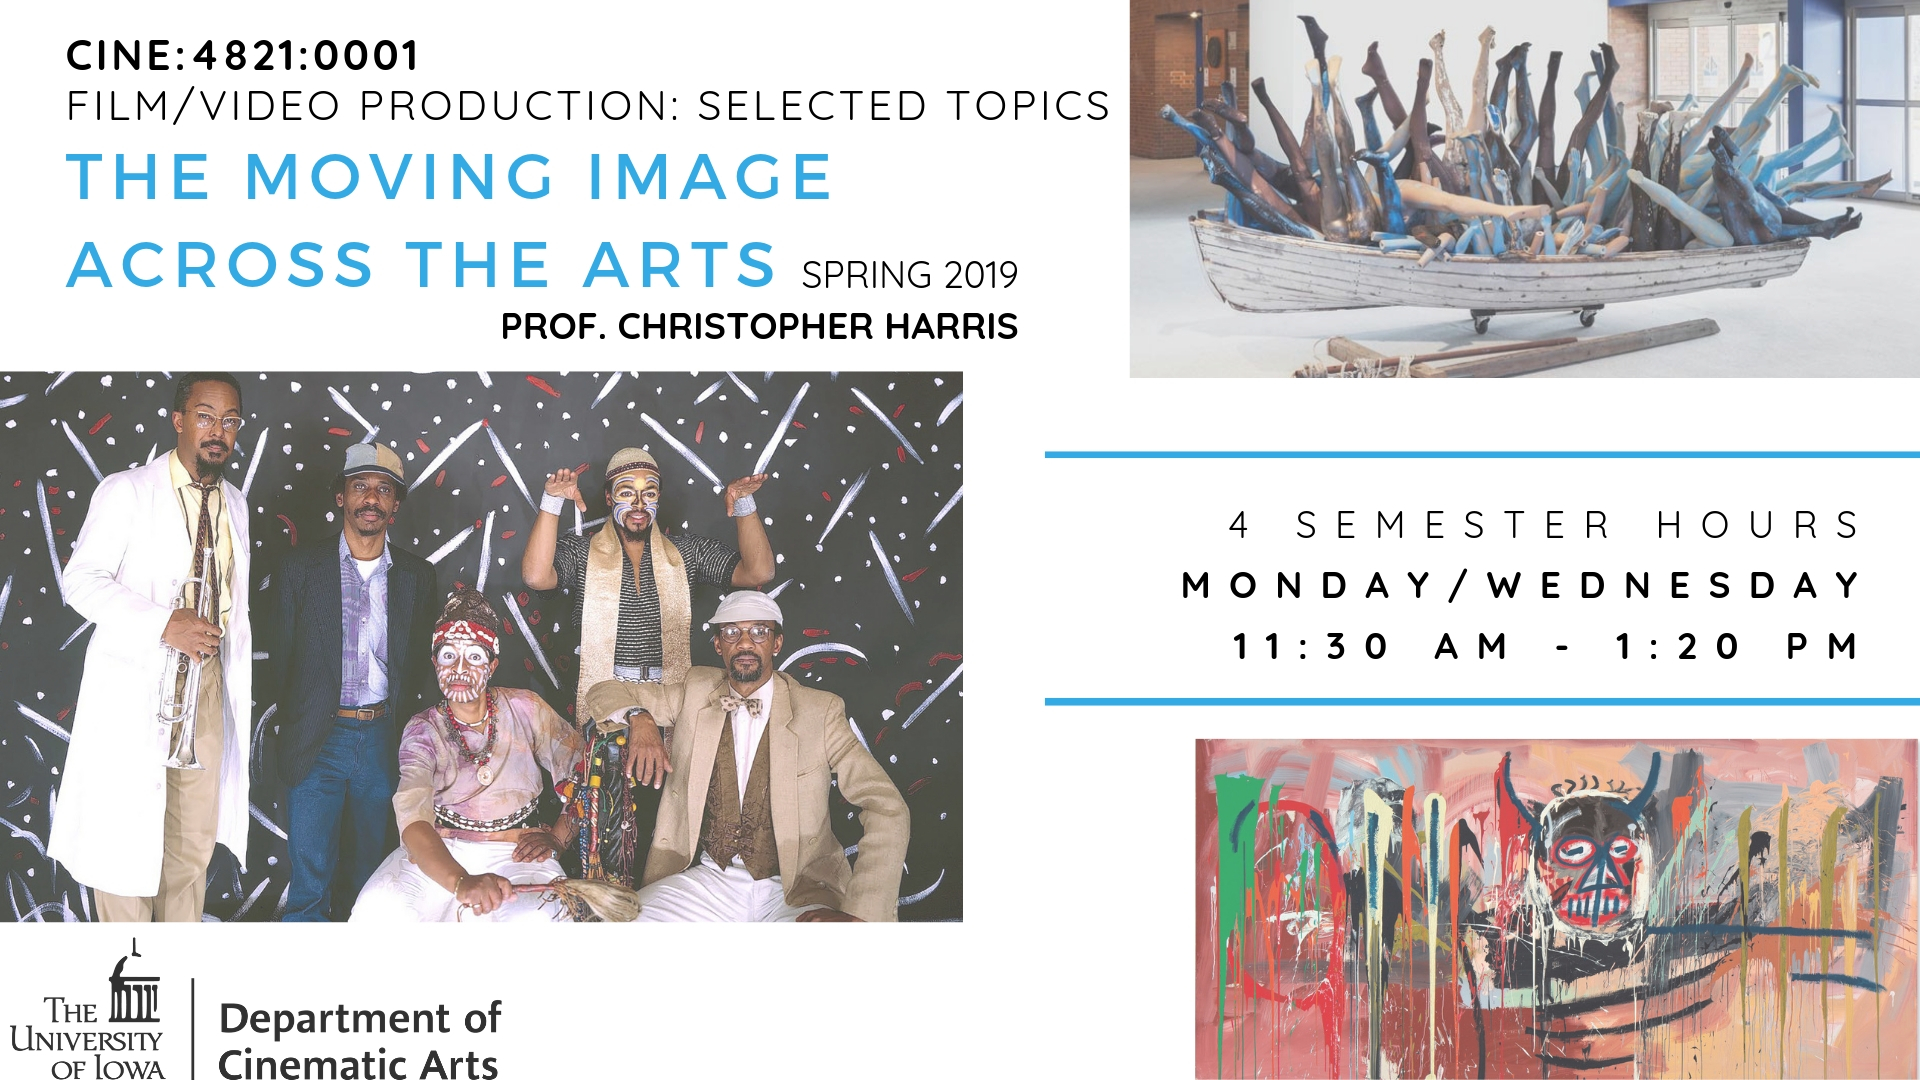 CINE:4821:0001 Film/Video Production: Selected Topics - The Moving Image Across the Arts, Spring 2019 Prof. Christopher Harris. 4 Semester Hours, Monday/Wednesday 11:30 AM-1:20 PM